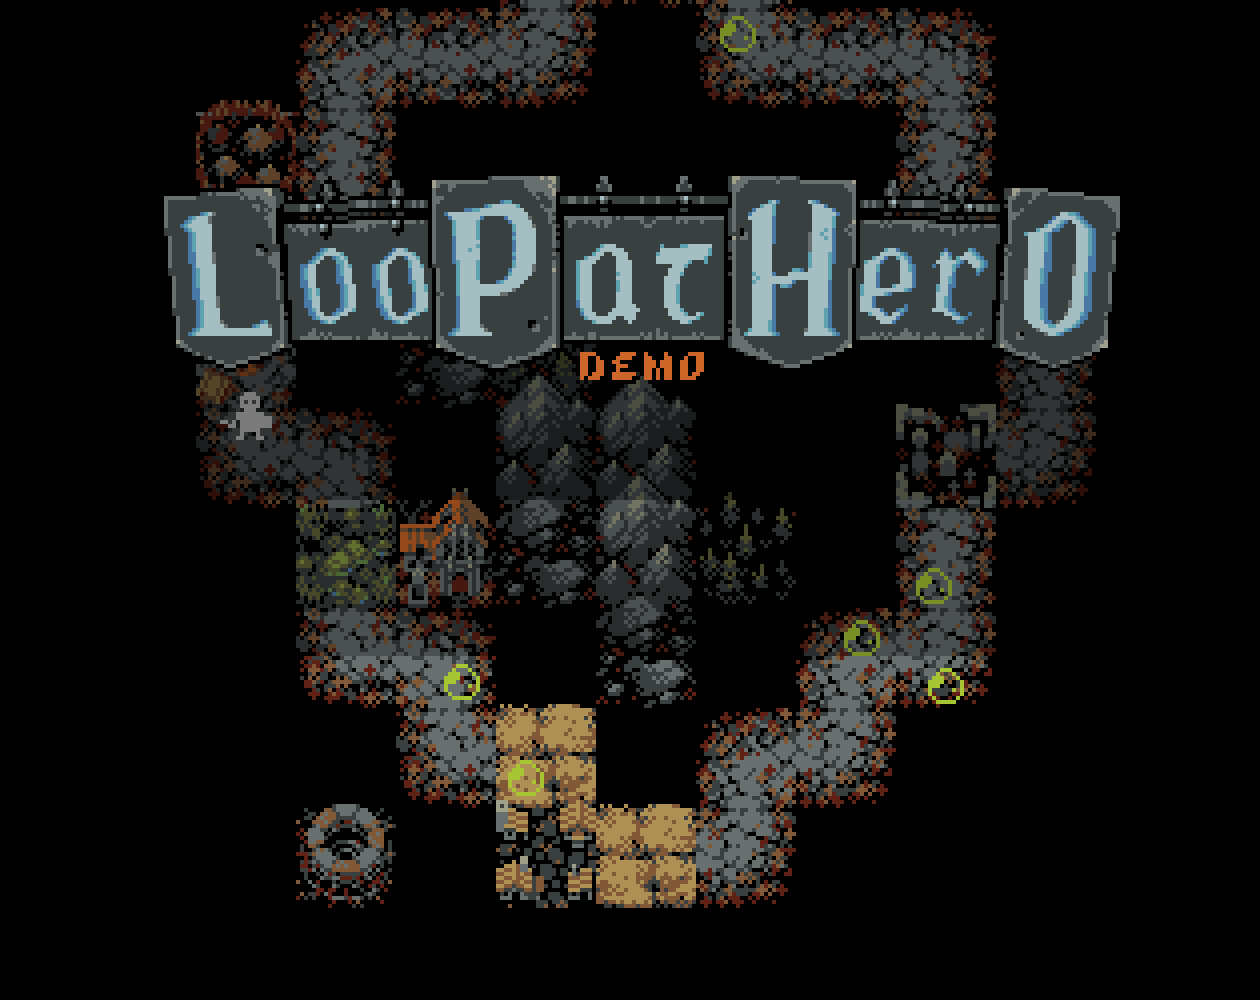 The text logo for Loop Hero's demo, LooPatHero, and an early look at the map.